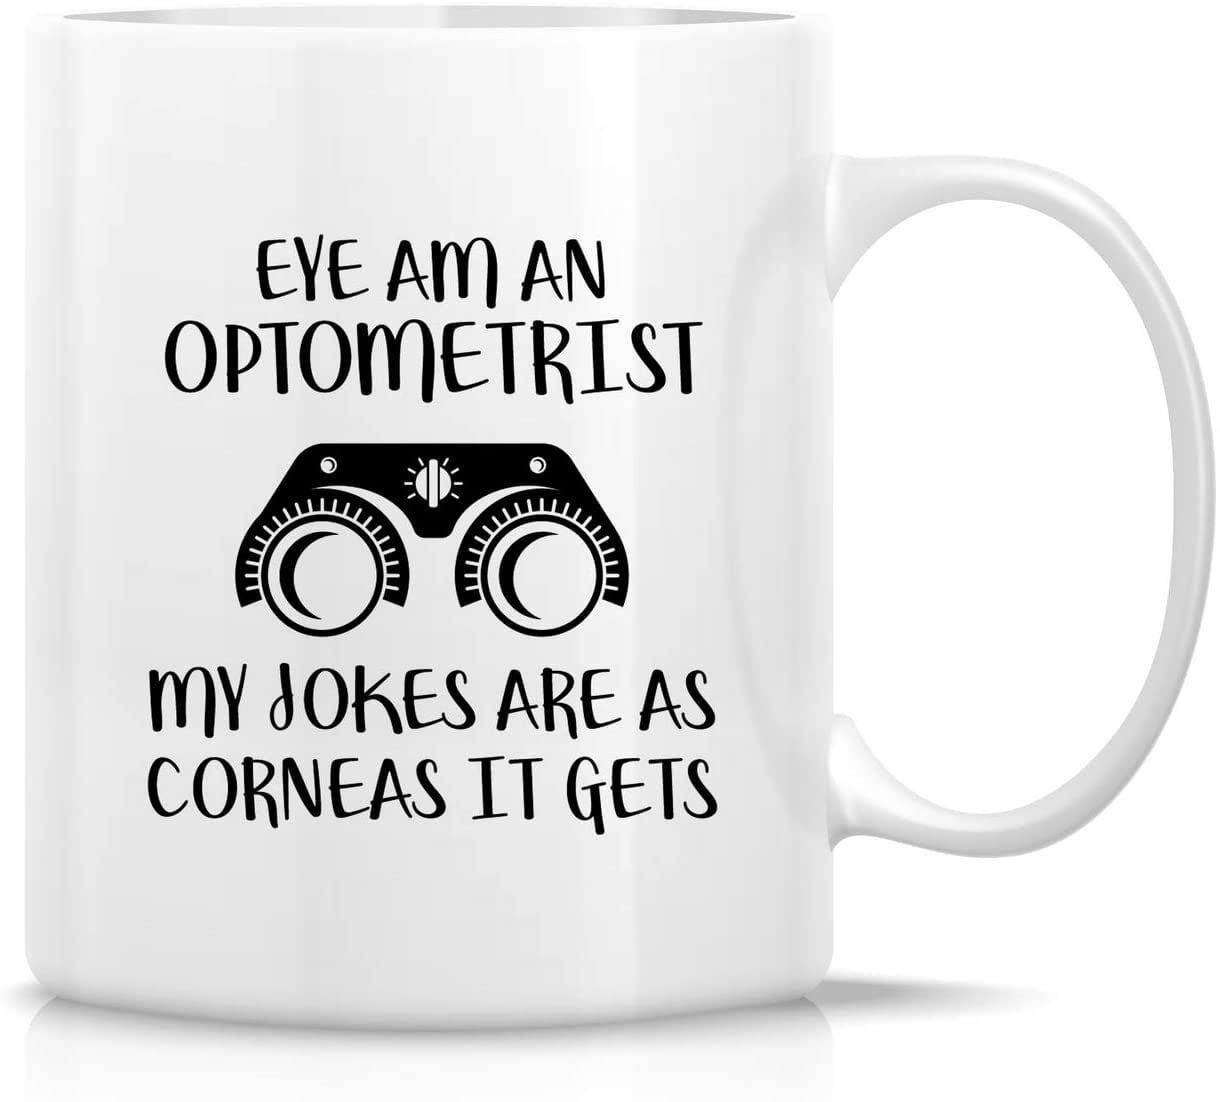 Ok But First Coffee 11 Ounces Ceramic Coffee Mug with Quotes, Funny Coffee  Mug with Sayings, Cool Co…See more Ok But First Coffee 11 Ounces Ceramic